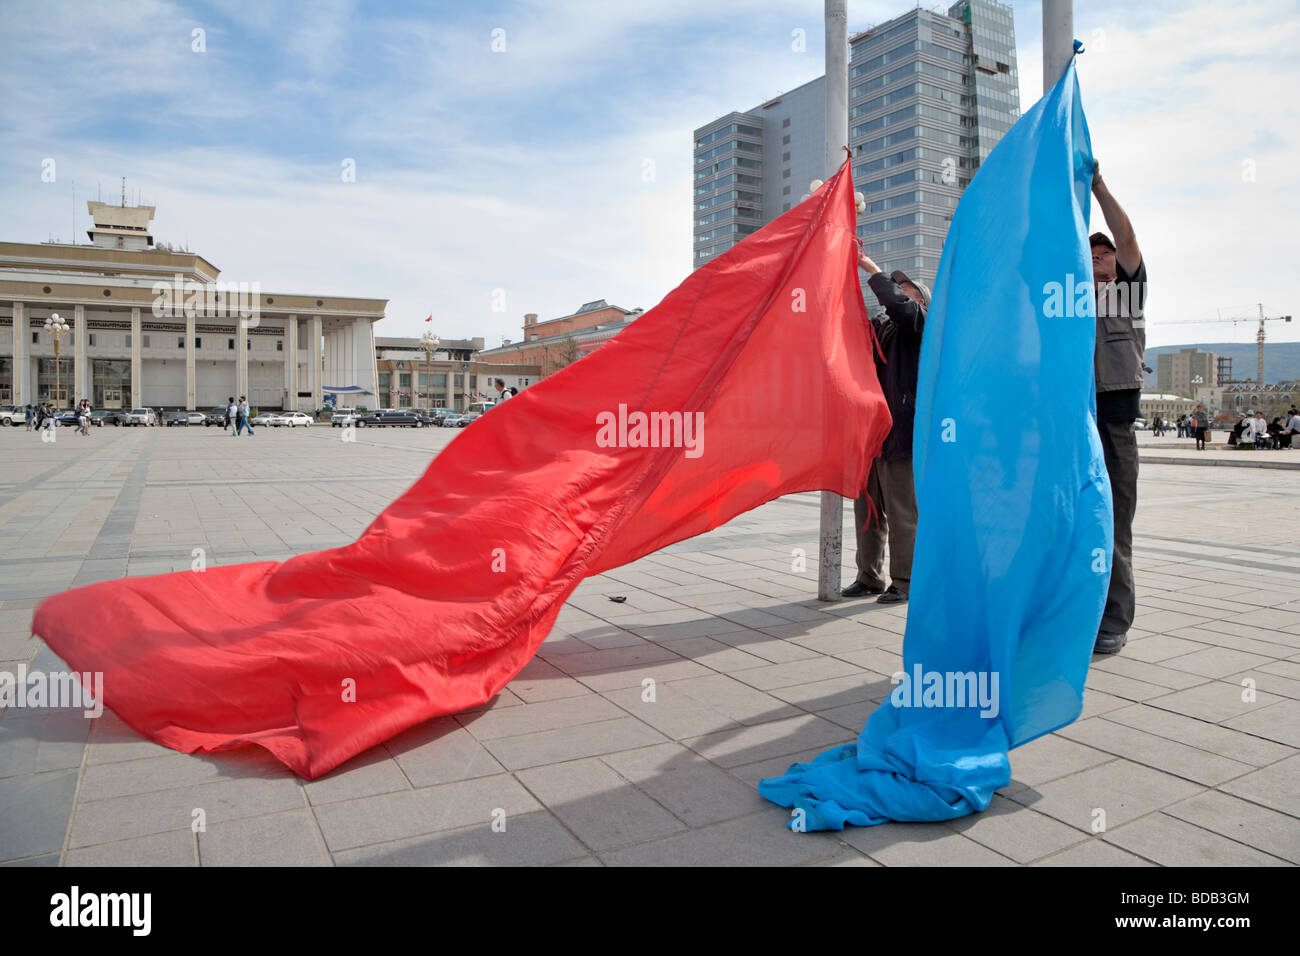 Mongolian men raise flags for a ceremony at Sukhbaatar Square, Ulaan Baatar, Mongolia Stock Photo